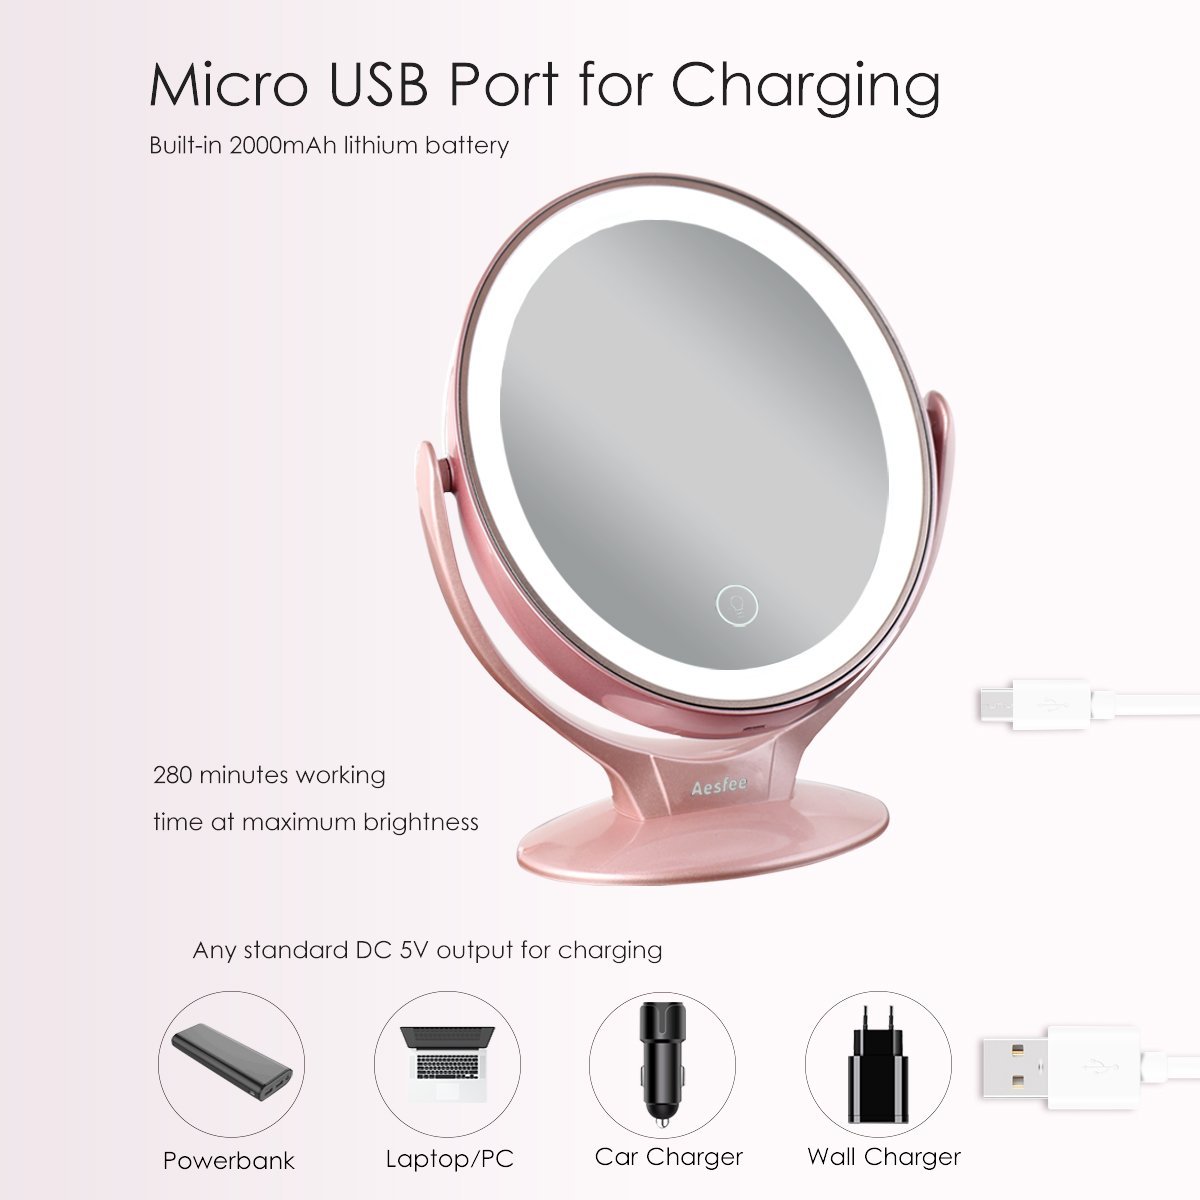 Aesfee LED Lighted Makeup Vanity Mirror Rechargeable,1x/7x Magnification  Double Sided 360 Degree Swivel Magnifying Mirror with Dimmable Touch  Screen, Portable Tabletop Illuminated Mirrors Rose Gold